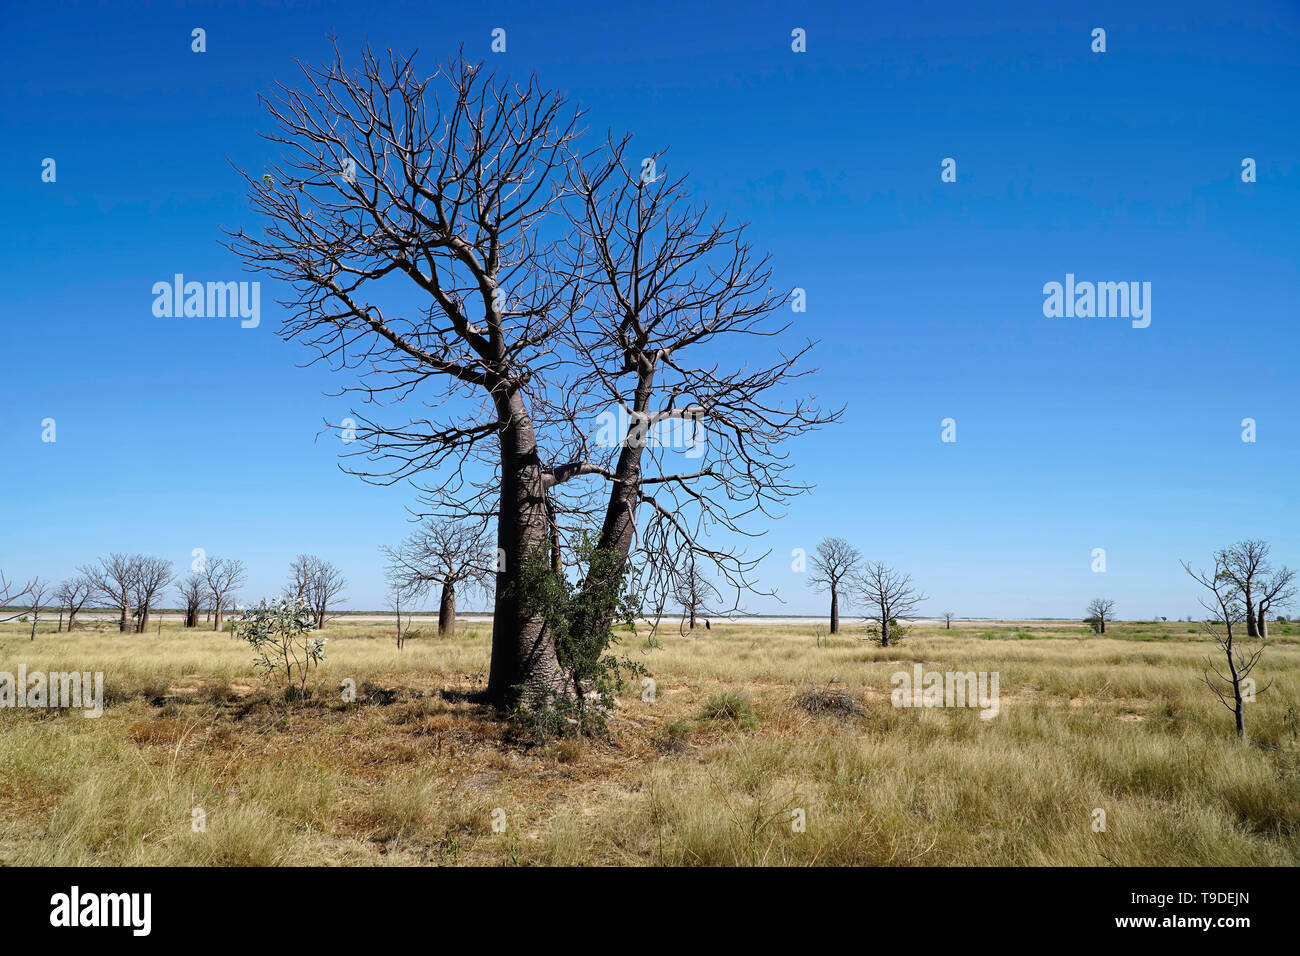 Boab trees growing in Western Australia which have a bottle-like appearance Stock Photo